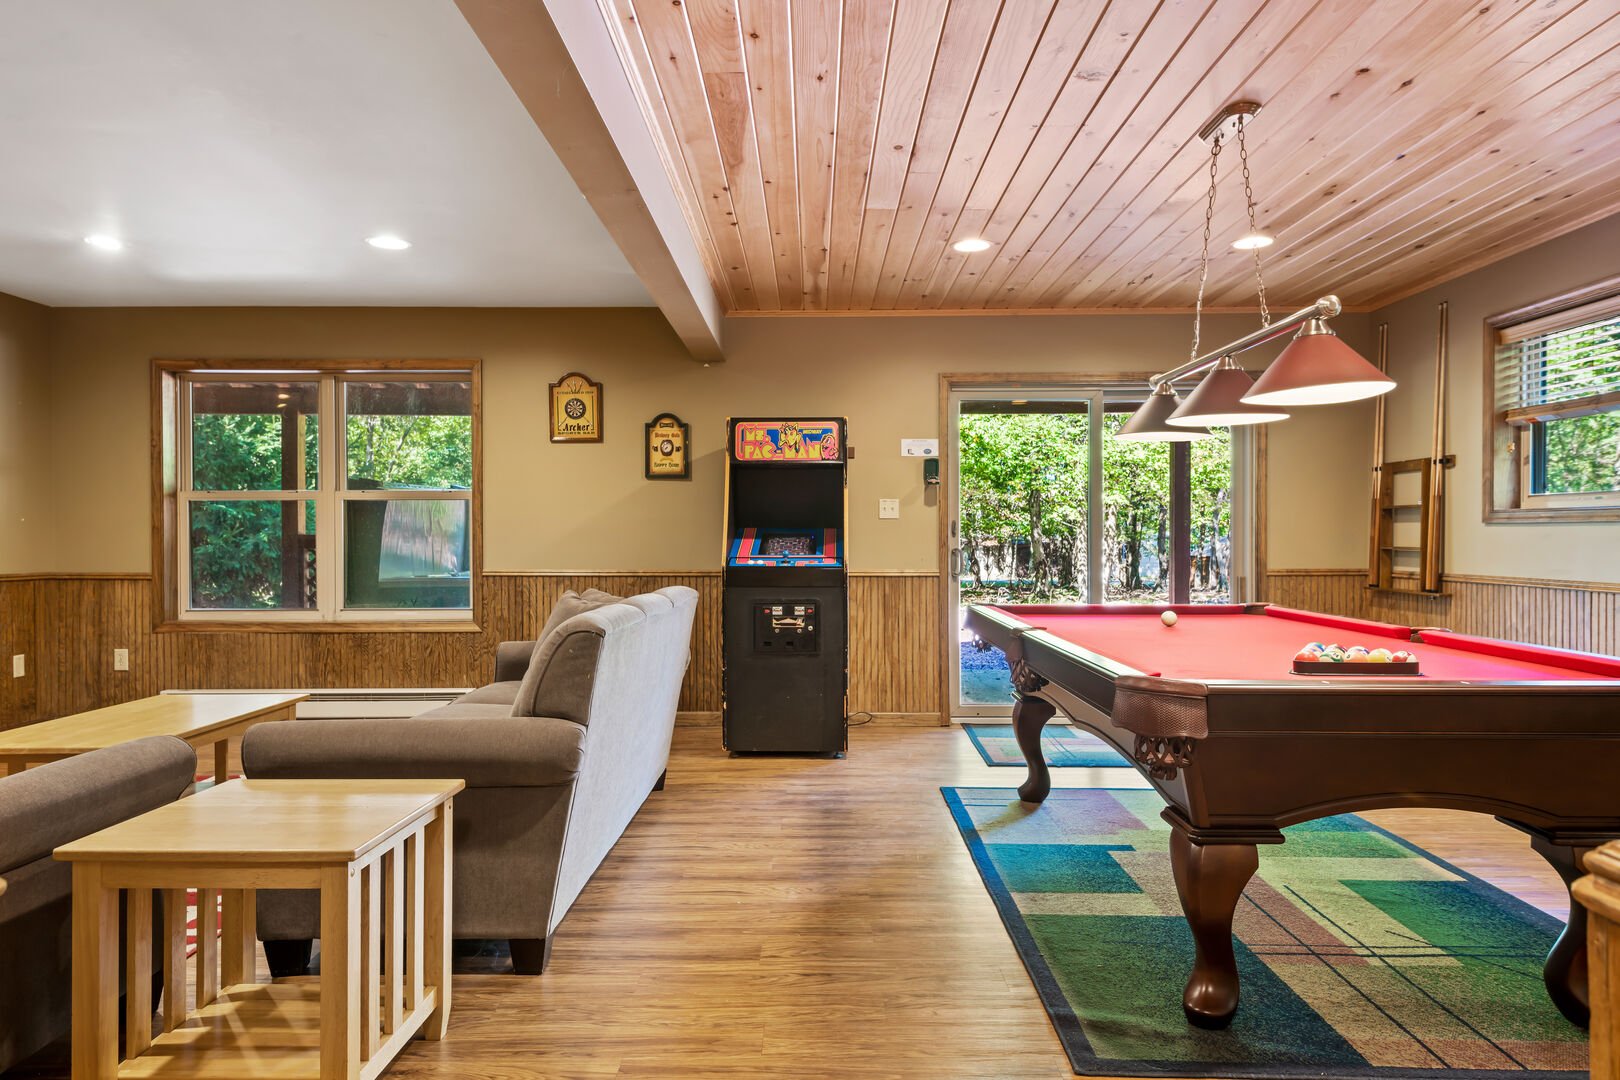 basement with couches, arcade machine and pool table